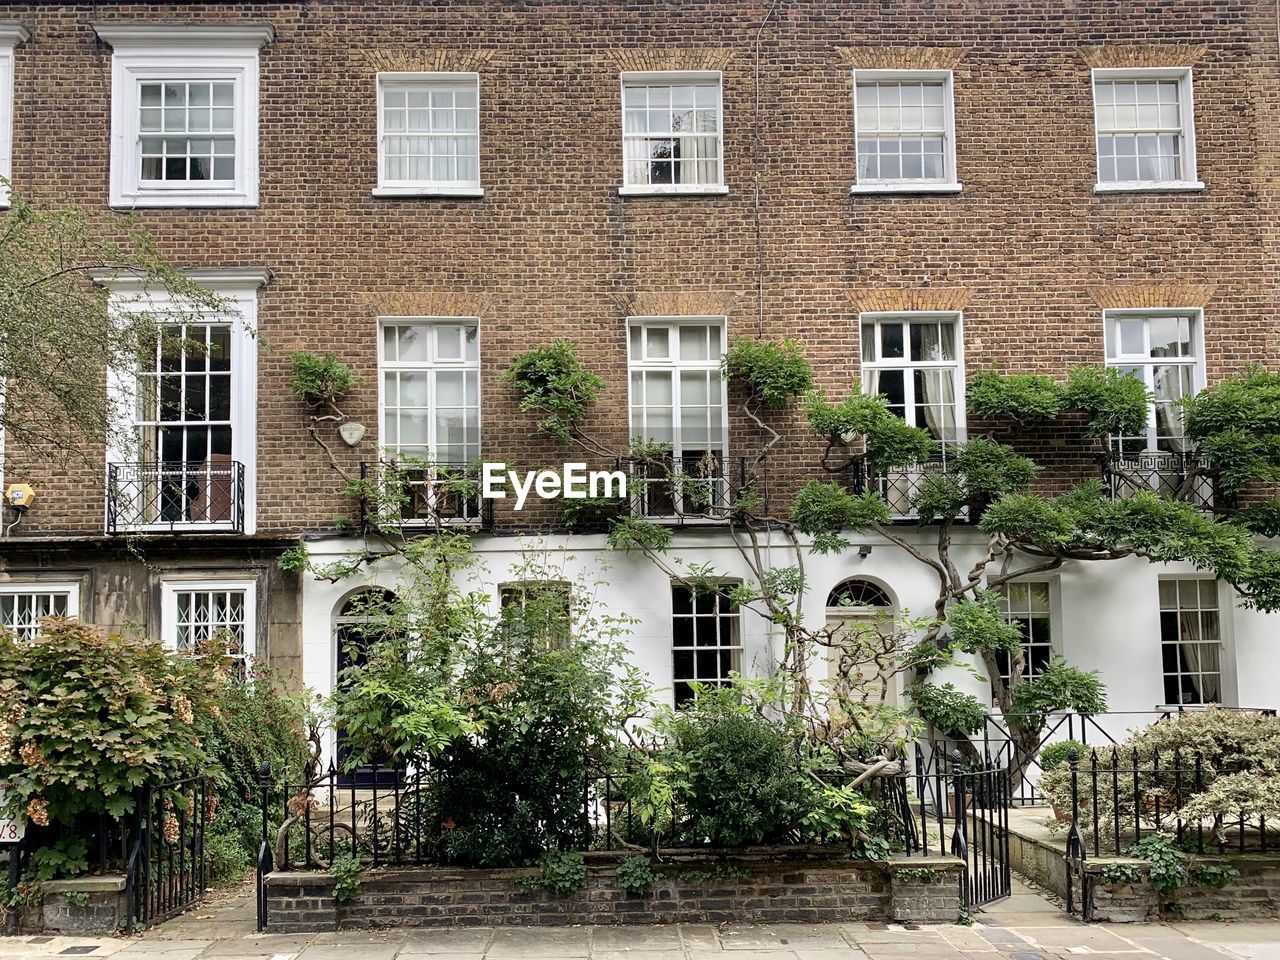 Charming georgian house in kensington, london. with climbing wisteria tree and front garden